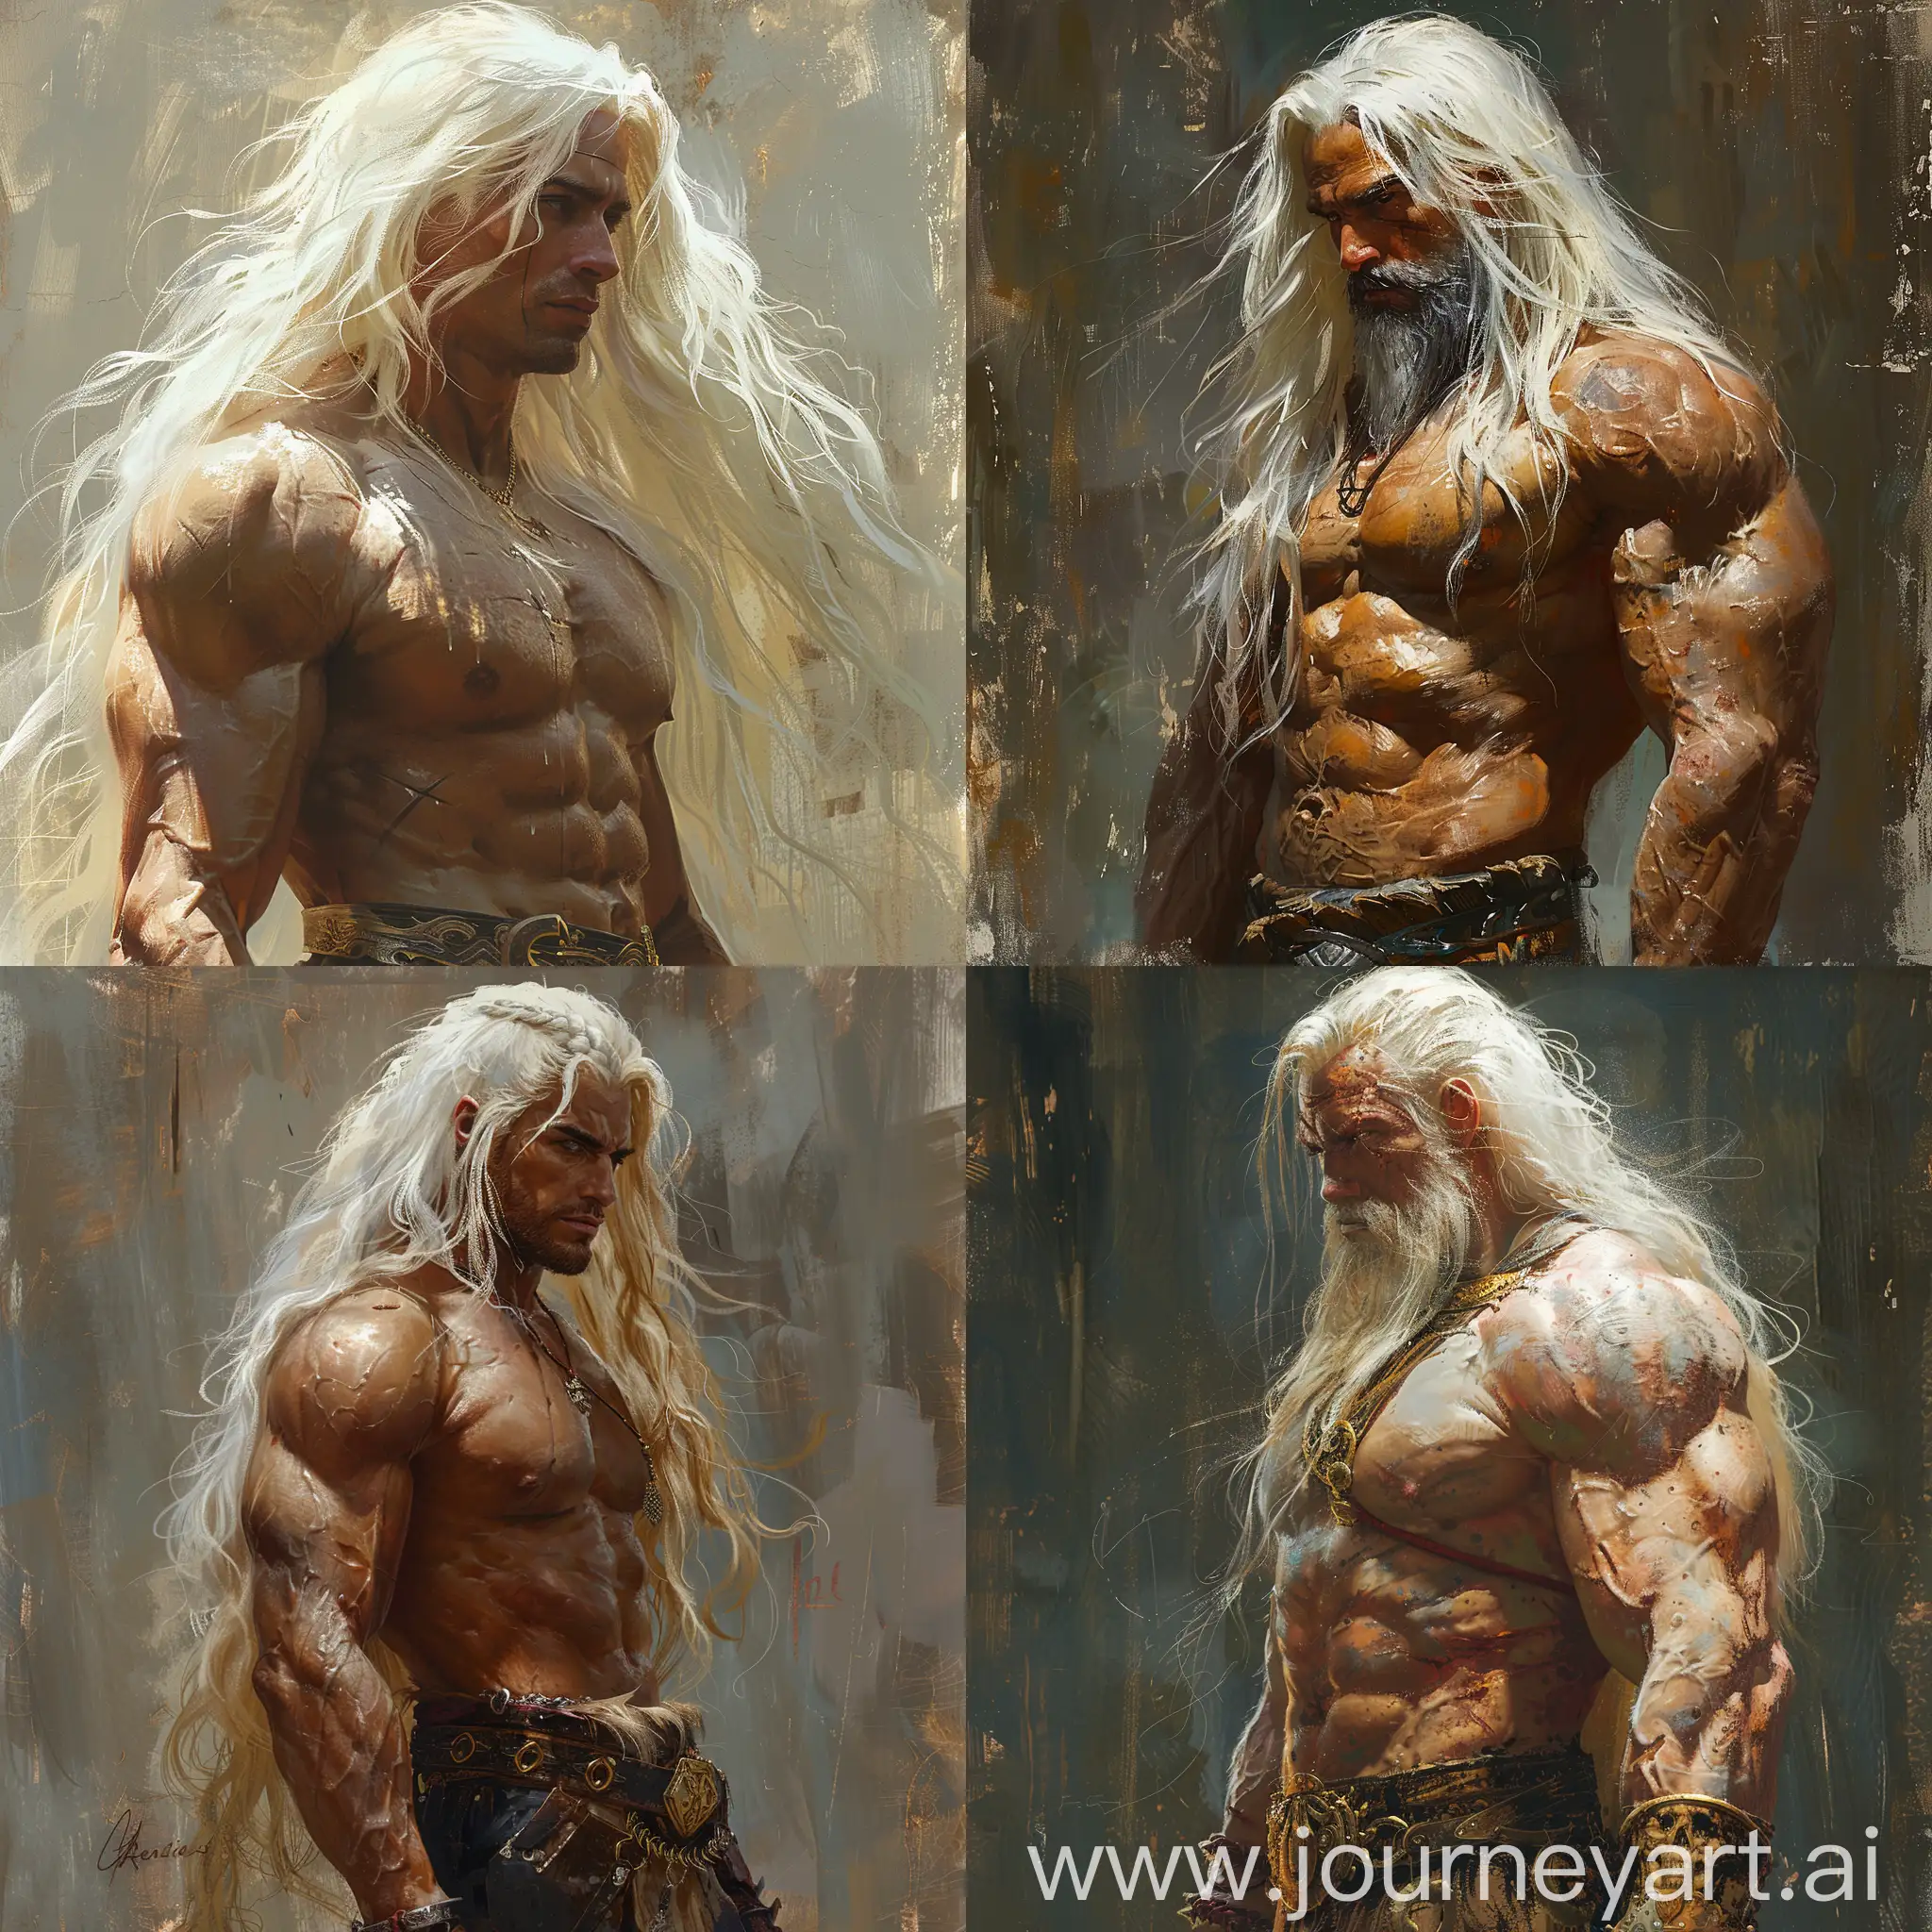 Mystical-Warrior-with-Golden-Skin-and-White-Hair-Powerful-Realistic-Portrait